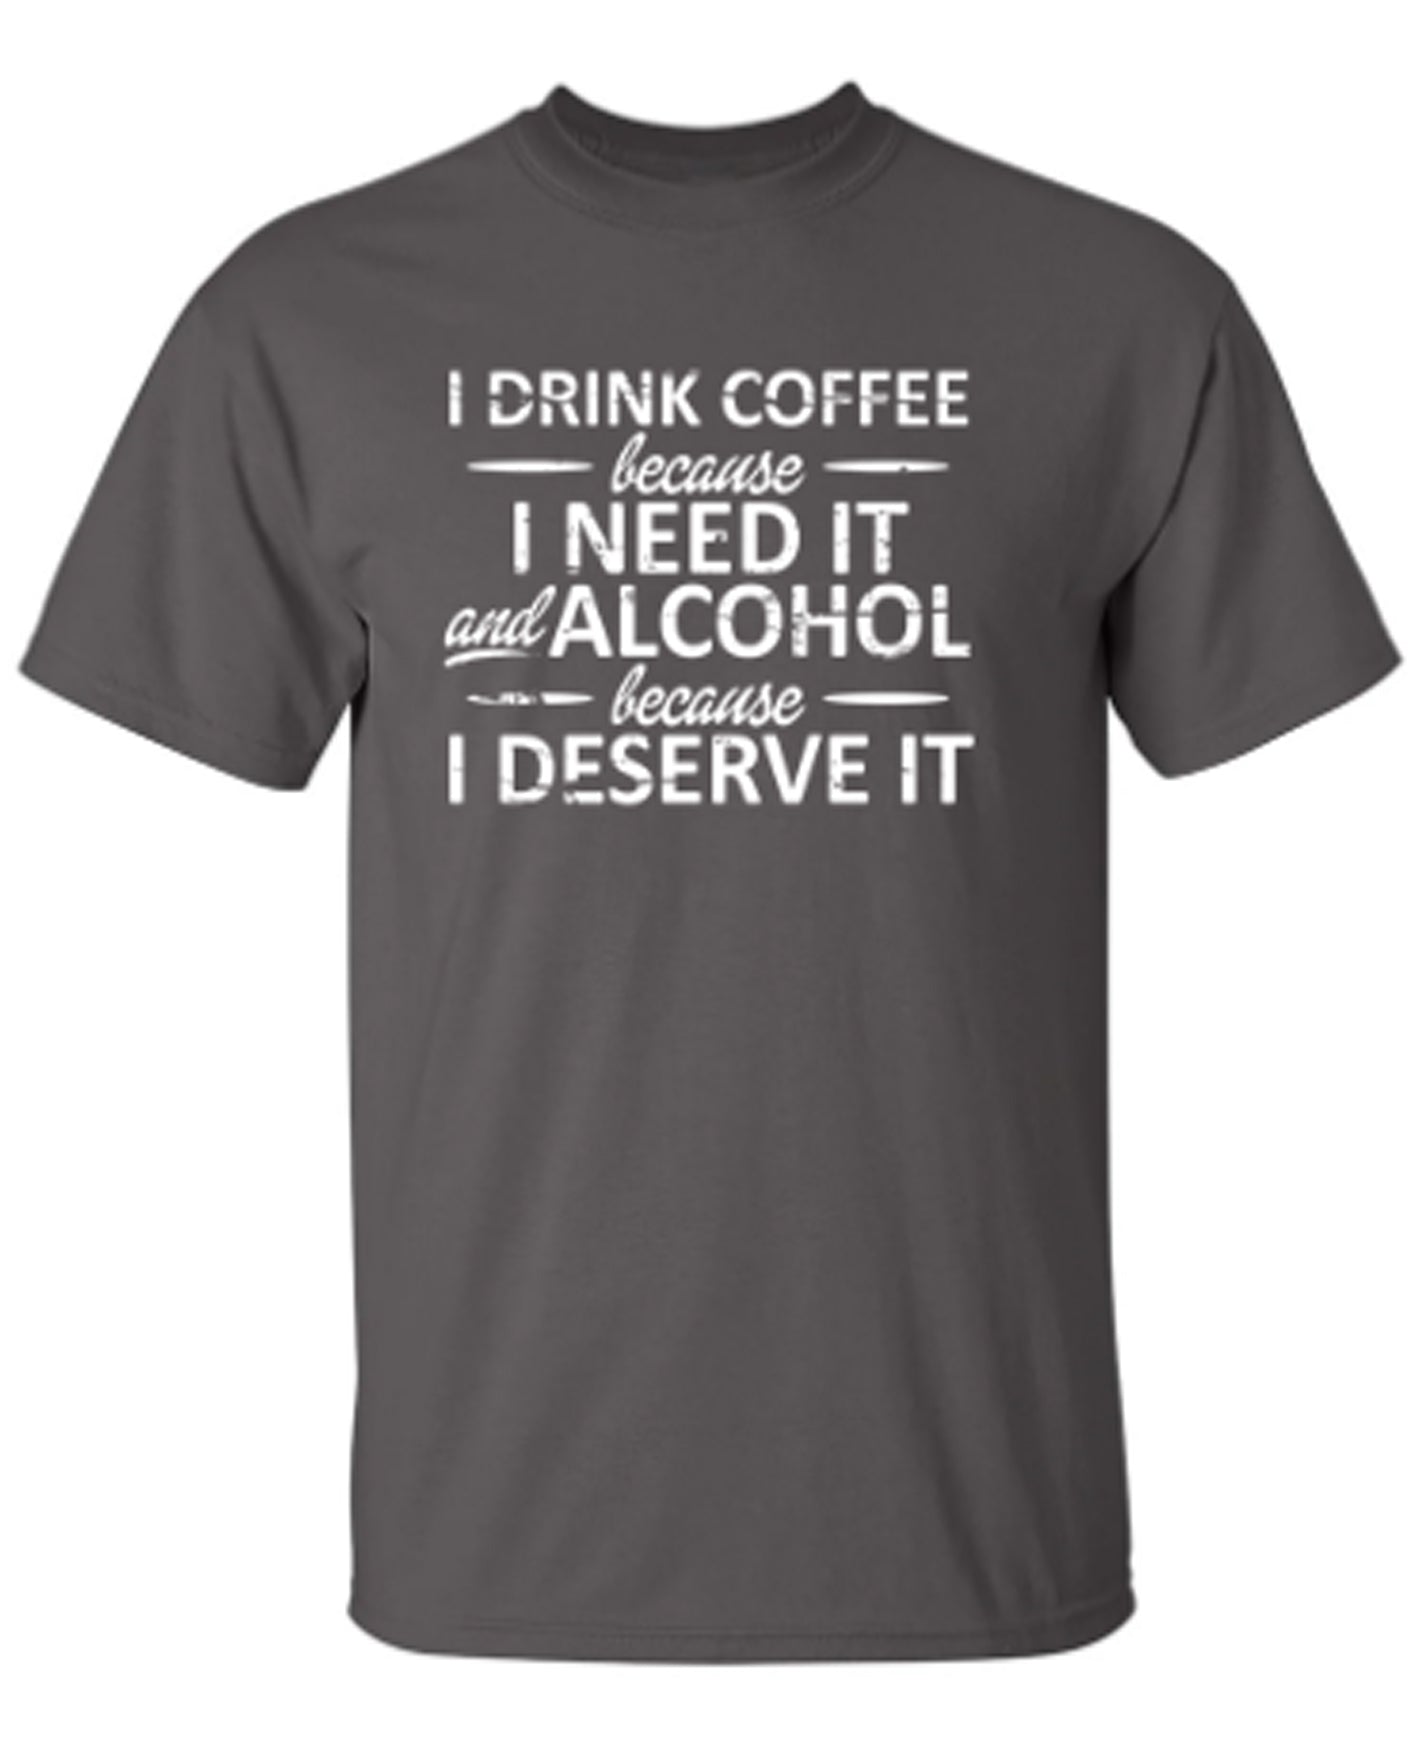 I Drink Coffee Because I Need It And Alcohol Because I Deserve It - Funny T Shirts & Graphic Tees